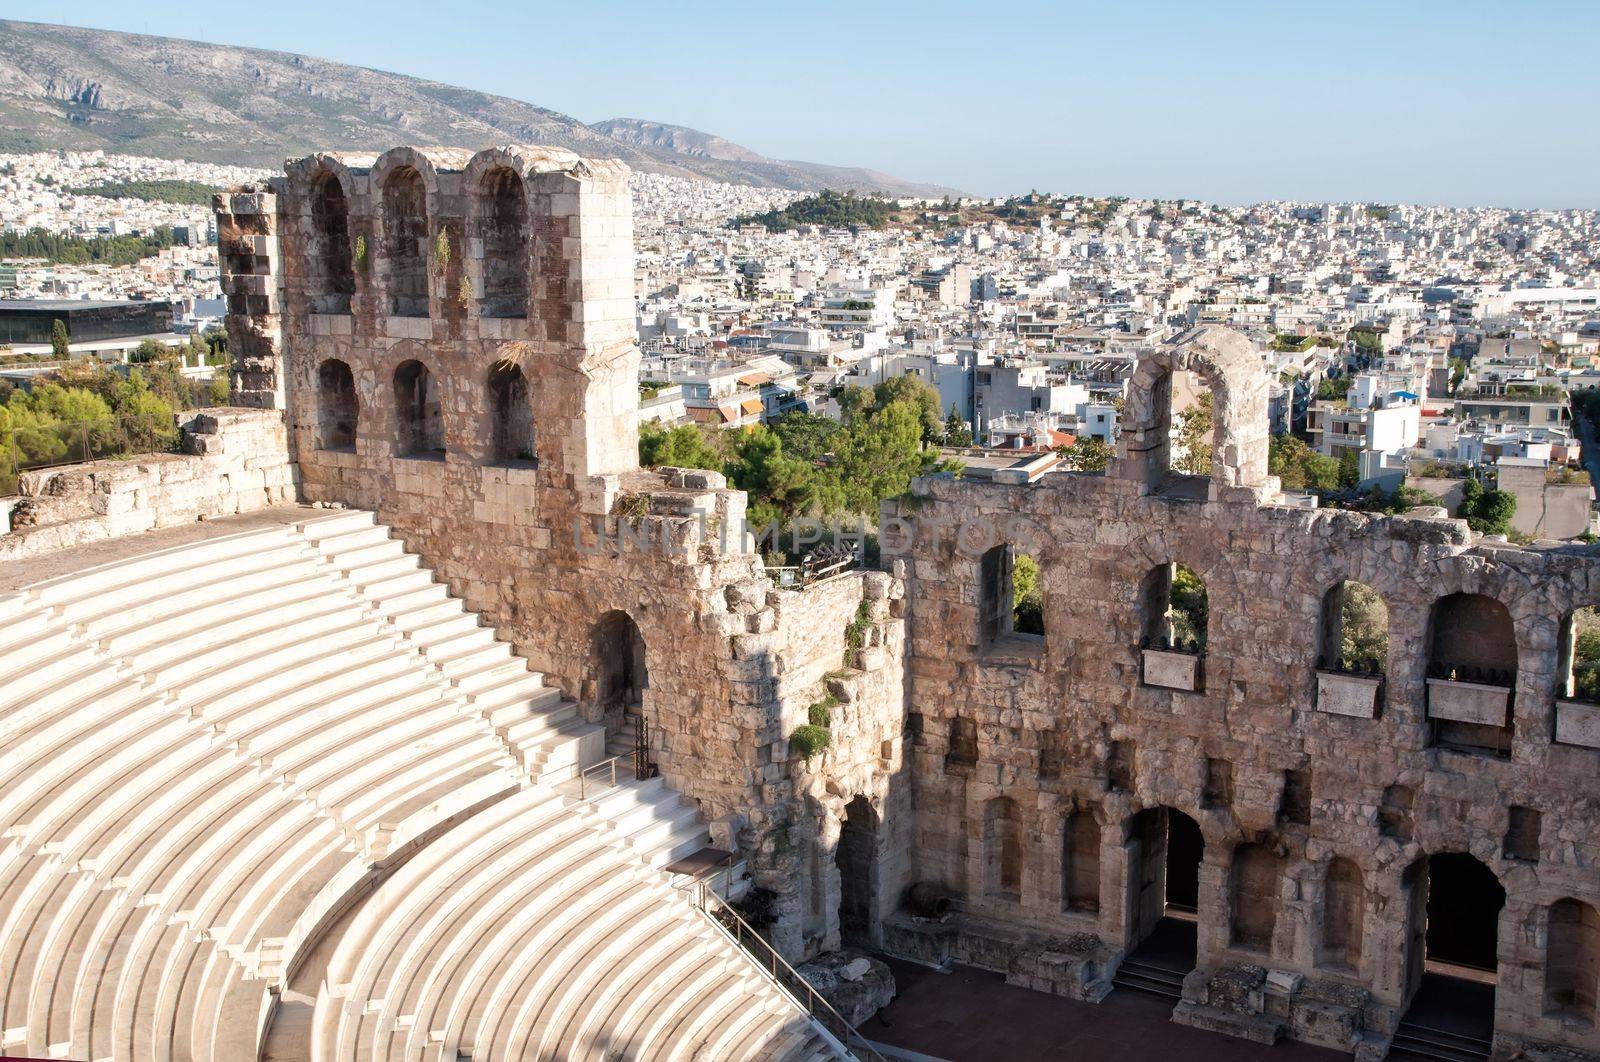 The Odeon of Herodes Atticus theatre in Athens by mitakag